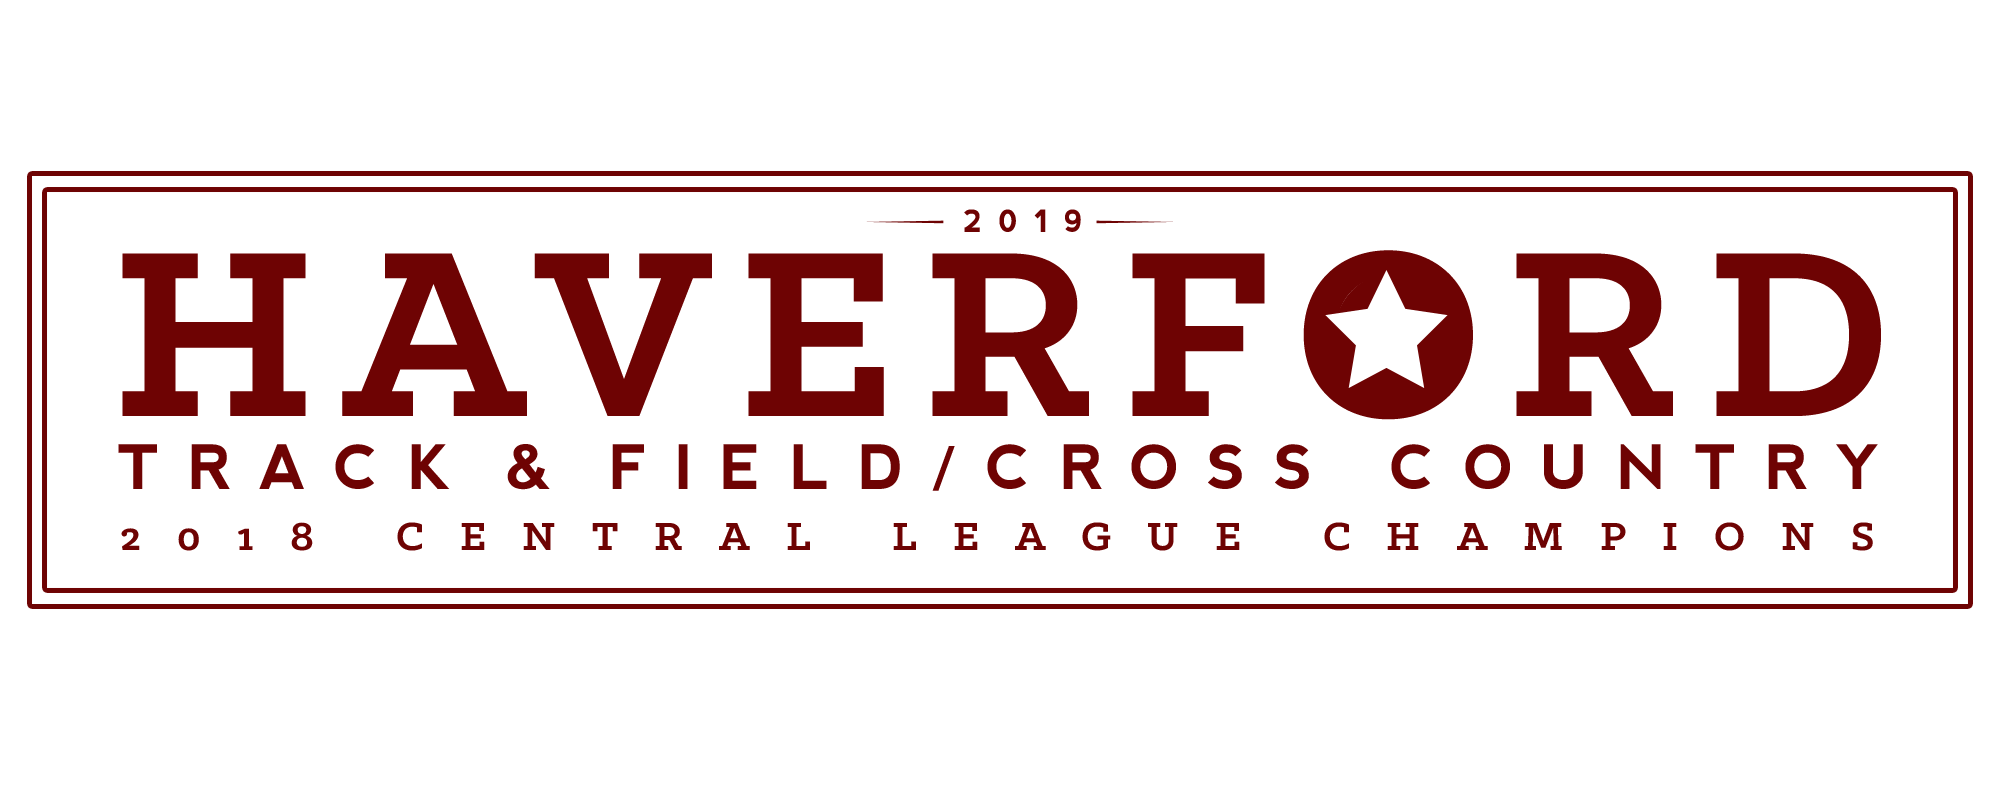 Haverford Logo - Haverford High School Cross Country and Track and Field – Go Fords XCTF!